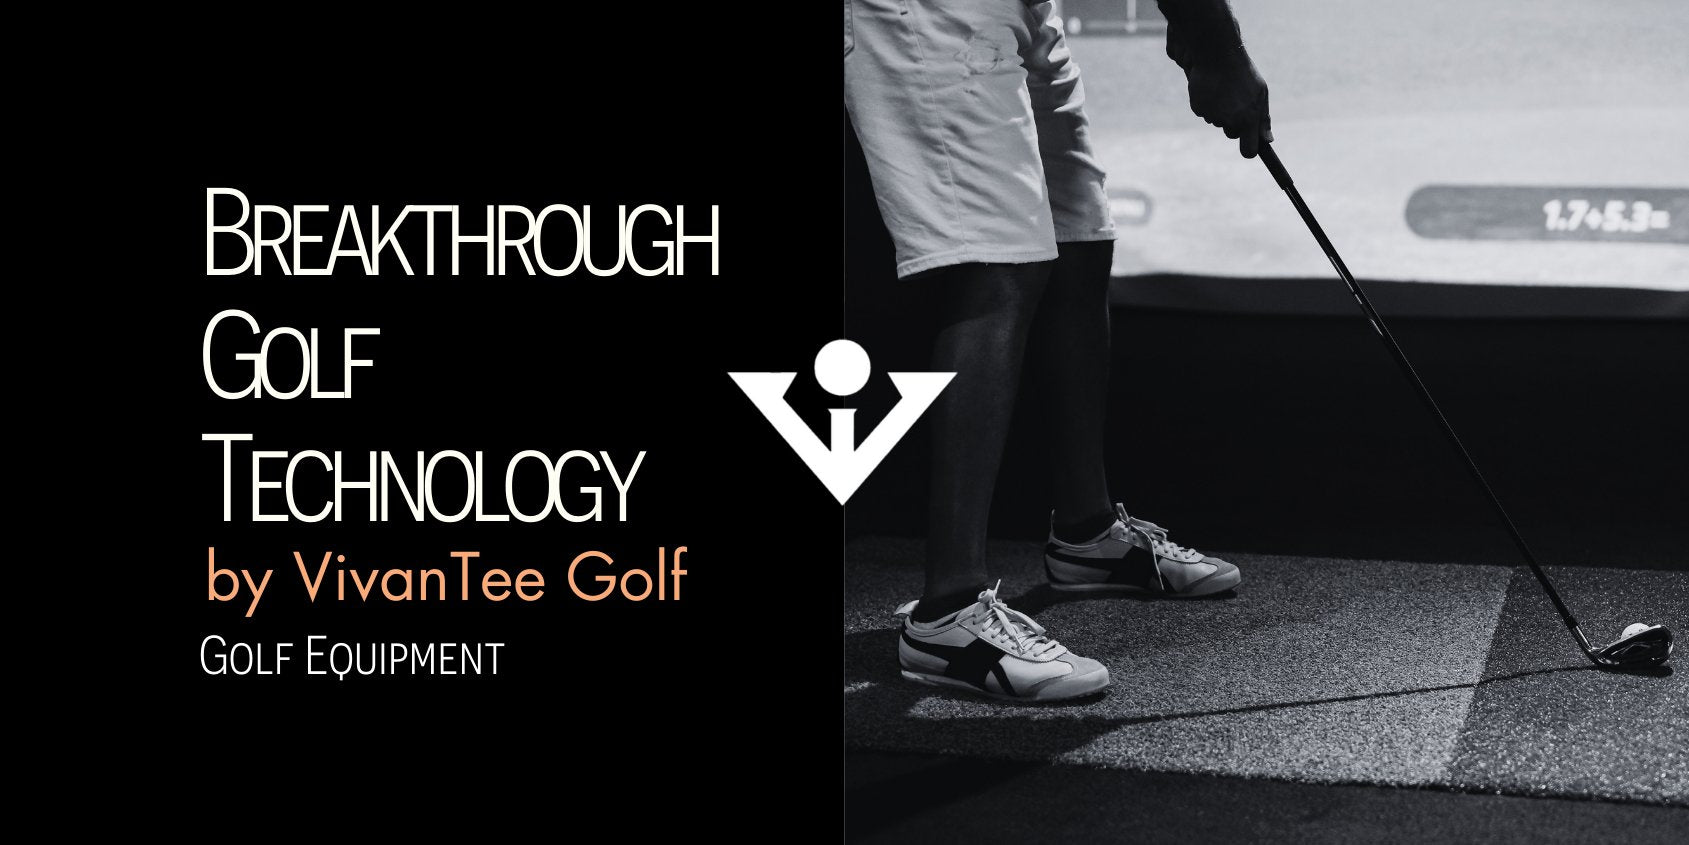 Image of man in a golf simulator on our signature blog banner for our article on breakthrough golf technology.